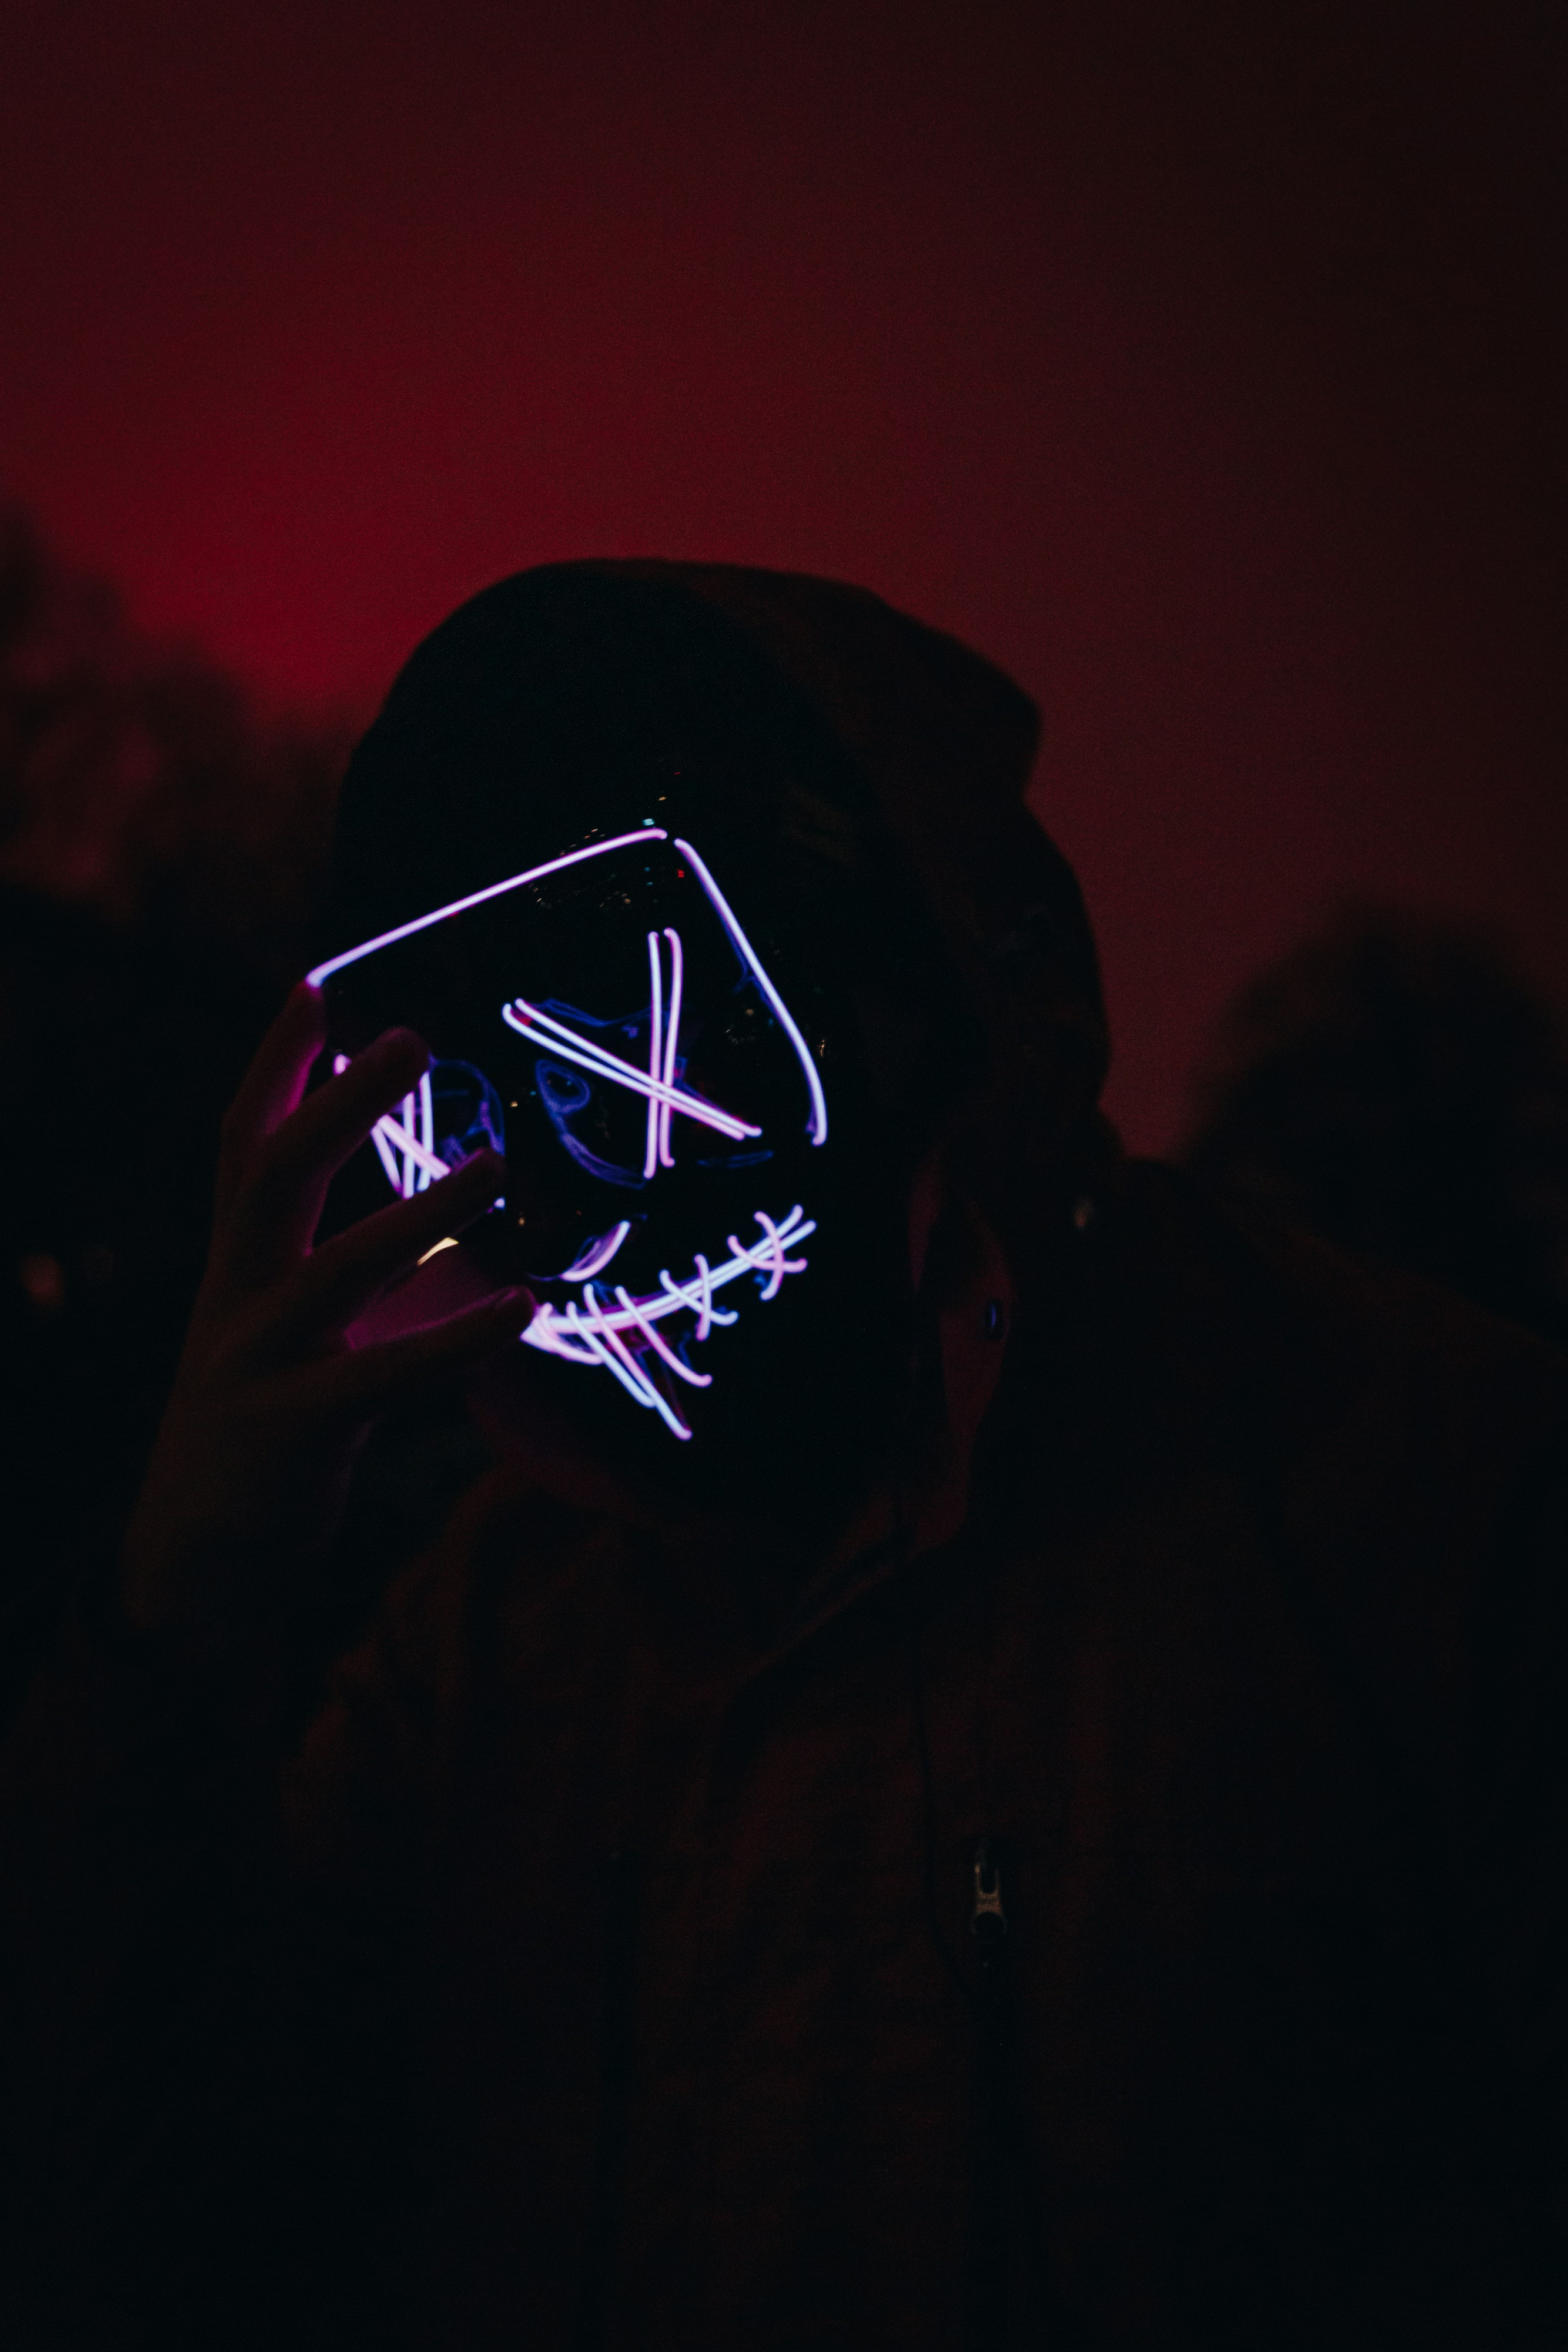 Led masked person in the dark reaching out to his face